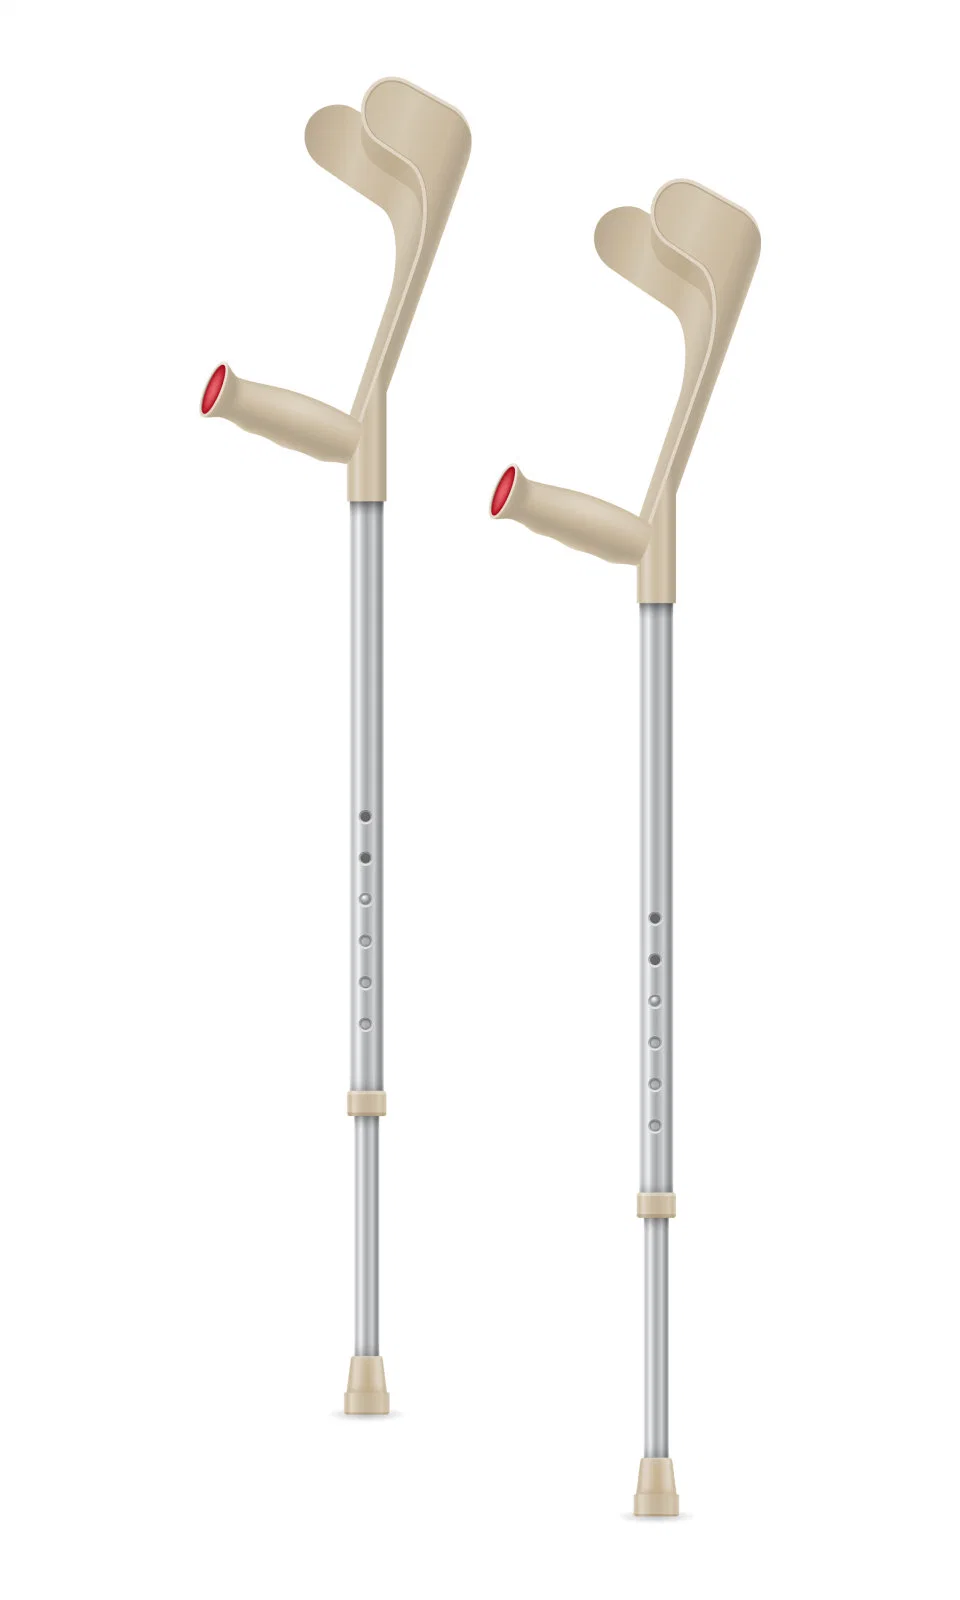 Four Legs Cane Color Brother Medical Walking Aid Spring Crutches